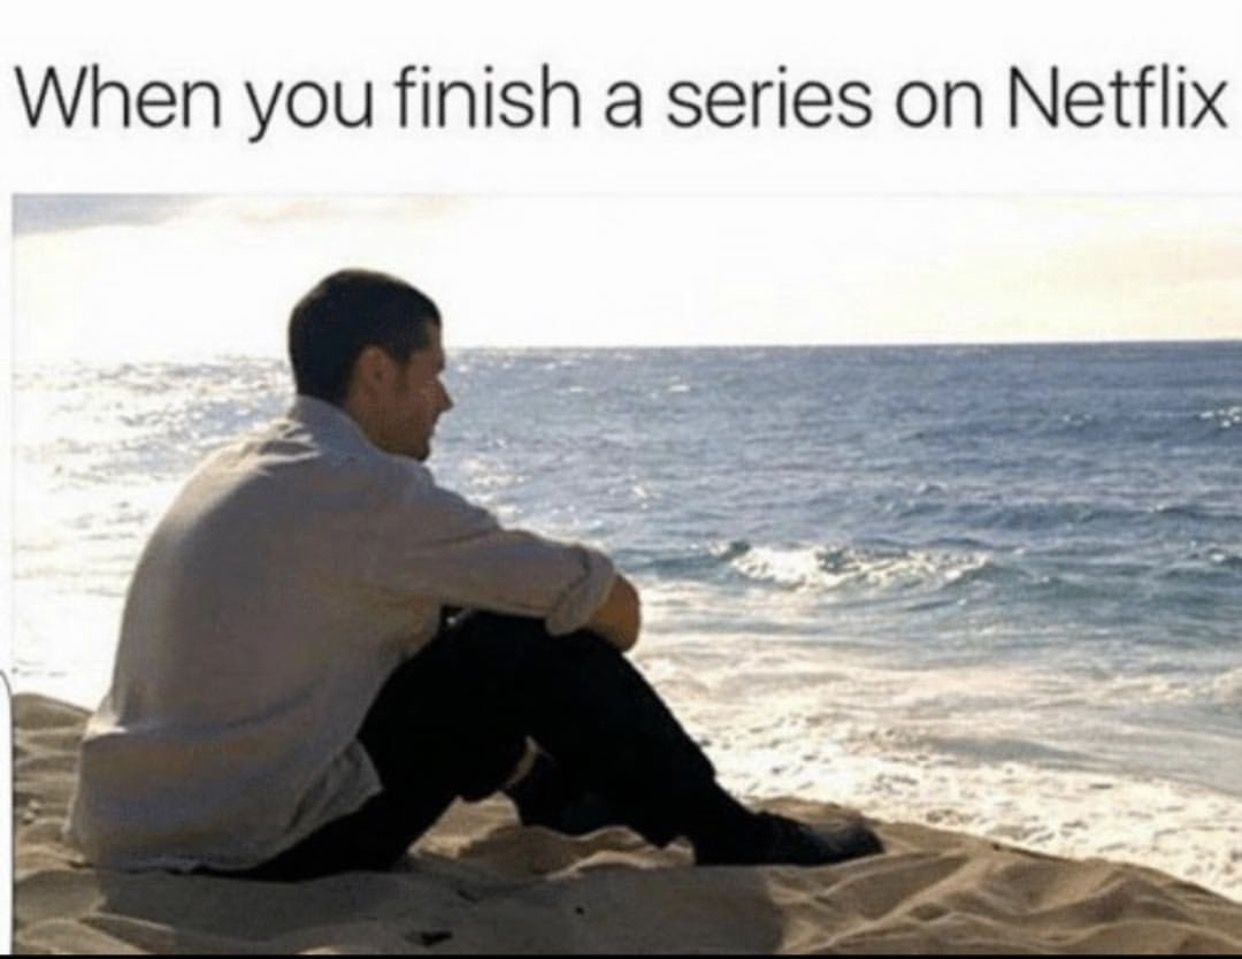 When you finish a show on Netflix | Funny pictures, Funny images, Funny ...